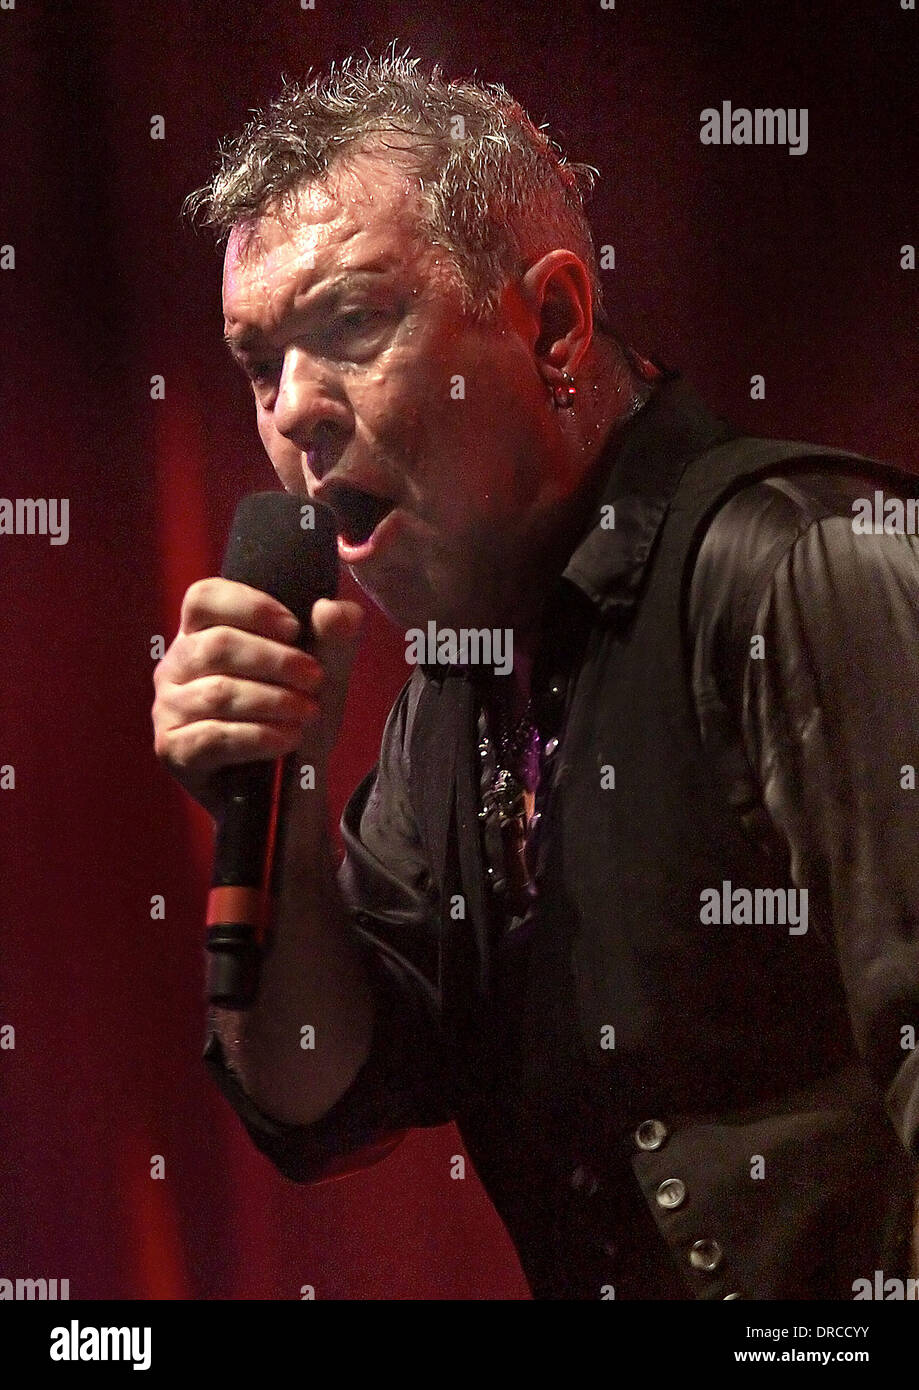 Jimmy Barnes of Cold Chisel performing live on the final night of their UK tour at Manchester Ritz Manchester, England - 16.07.12 Stock Photo